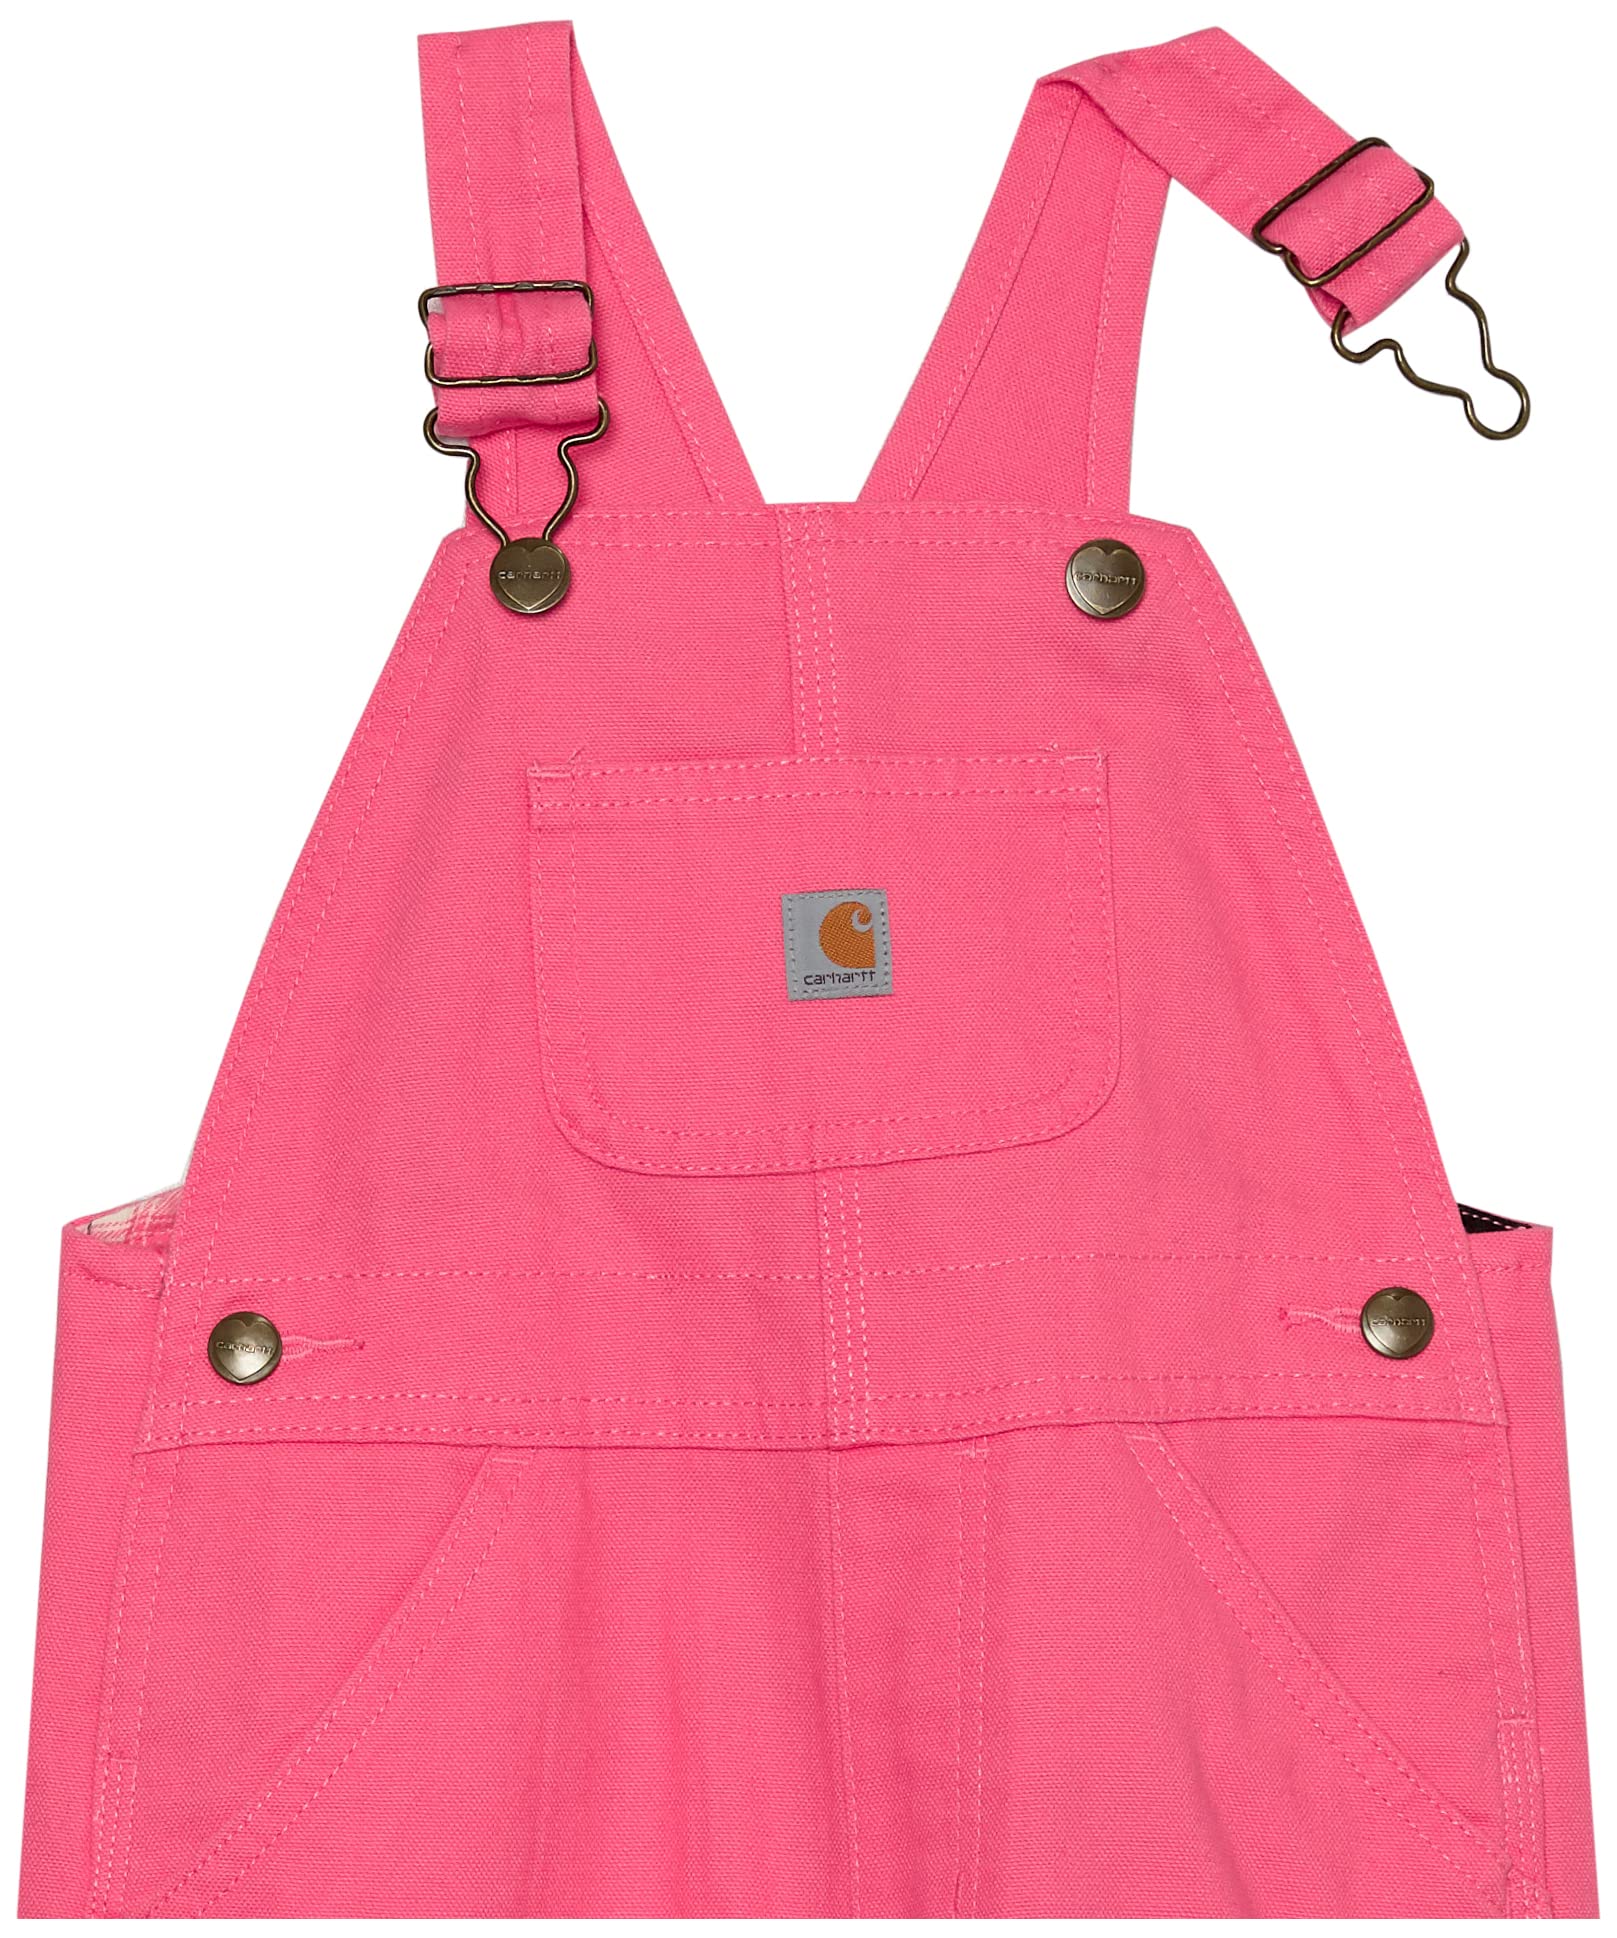 Carhartt girls Bib Overalls (Lined and Unlined)